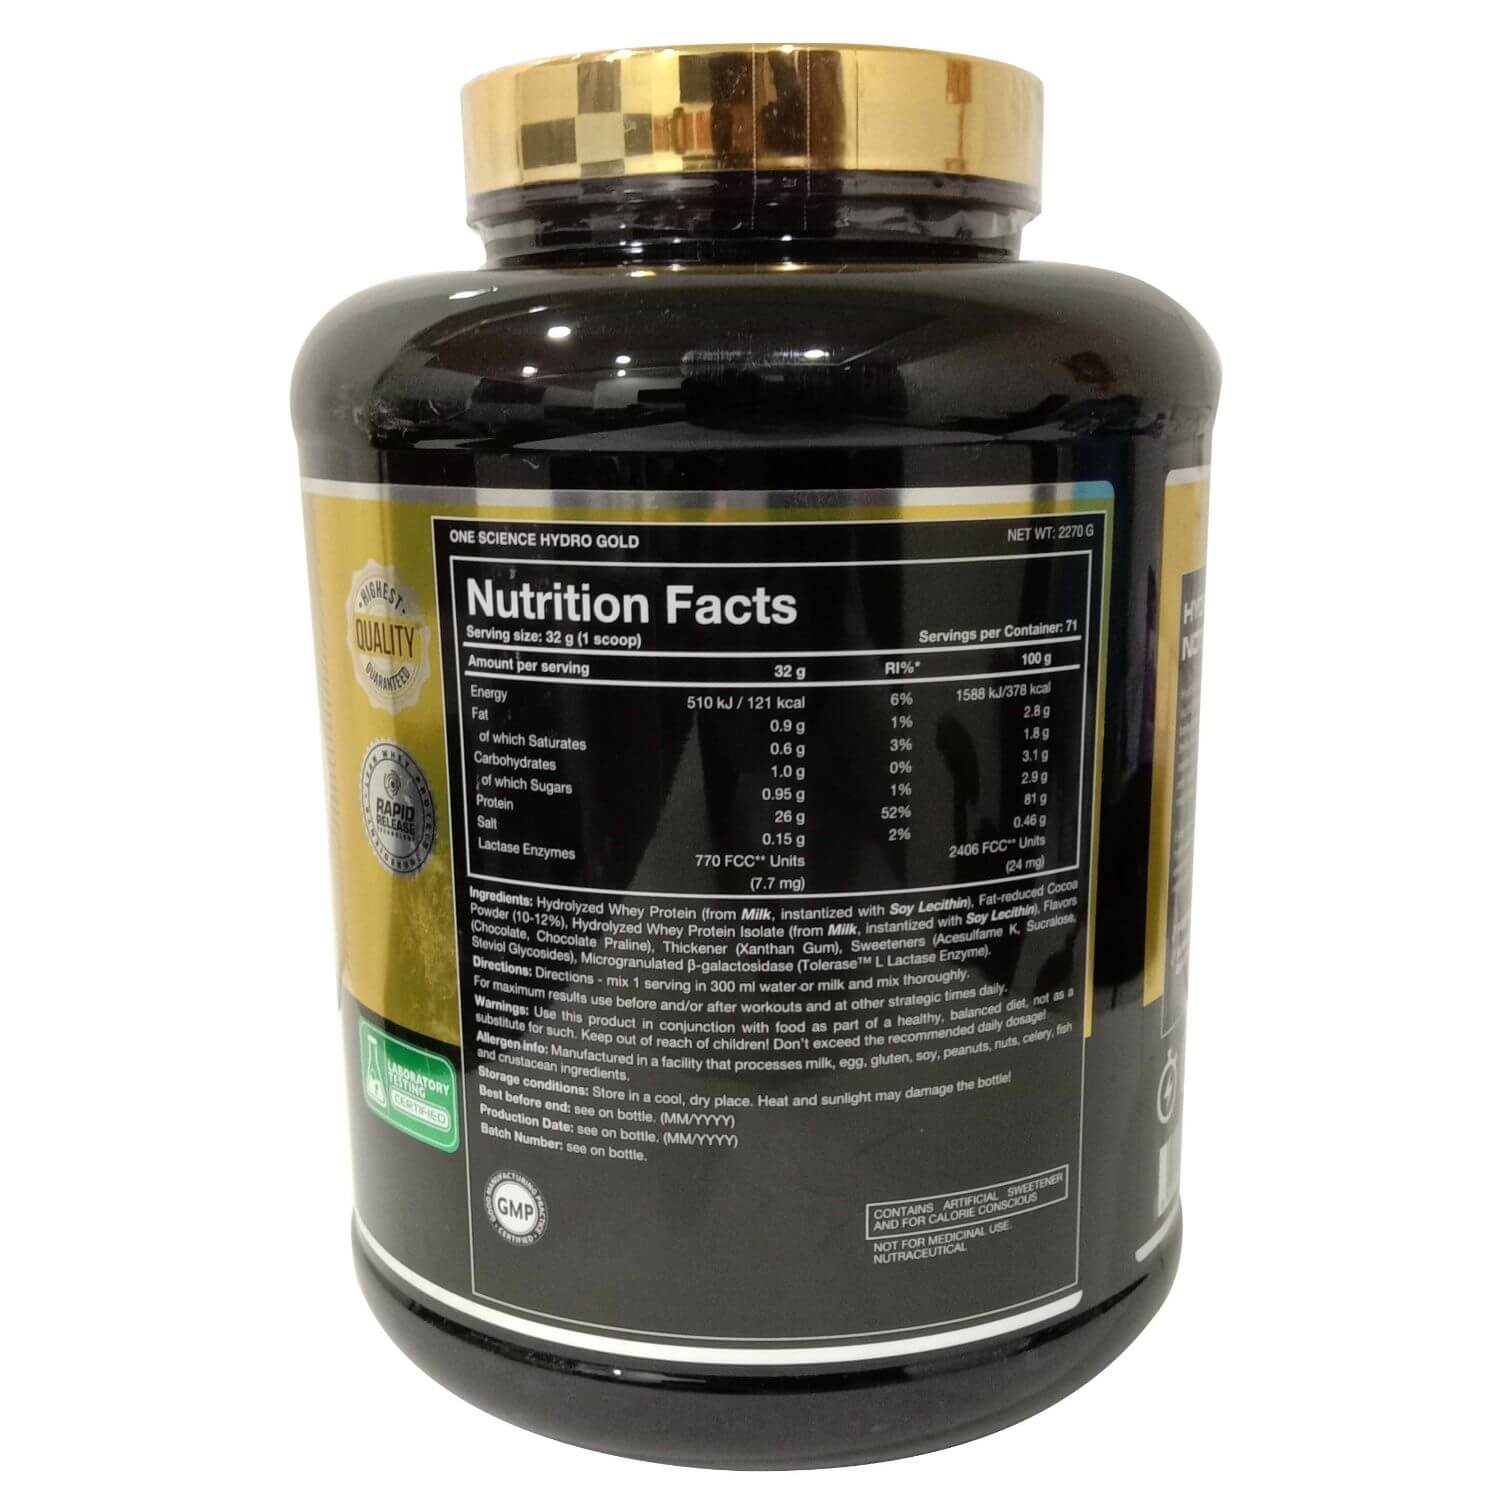 One Science Nutrition (OSN) HYDRO GOLD Hydrolysed Whey Protein Powder 5lb (2.27kg) - One Science -